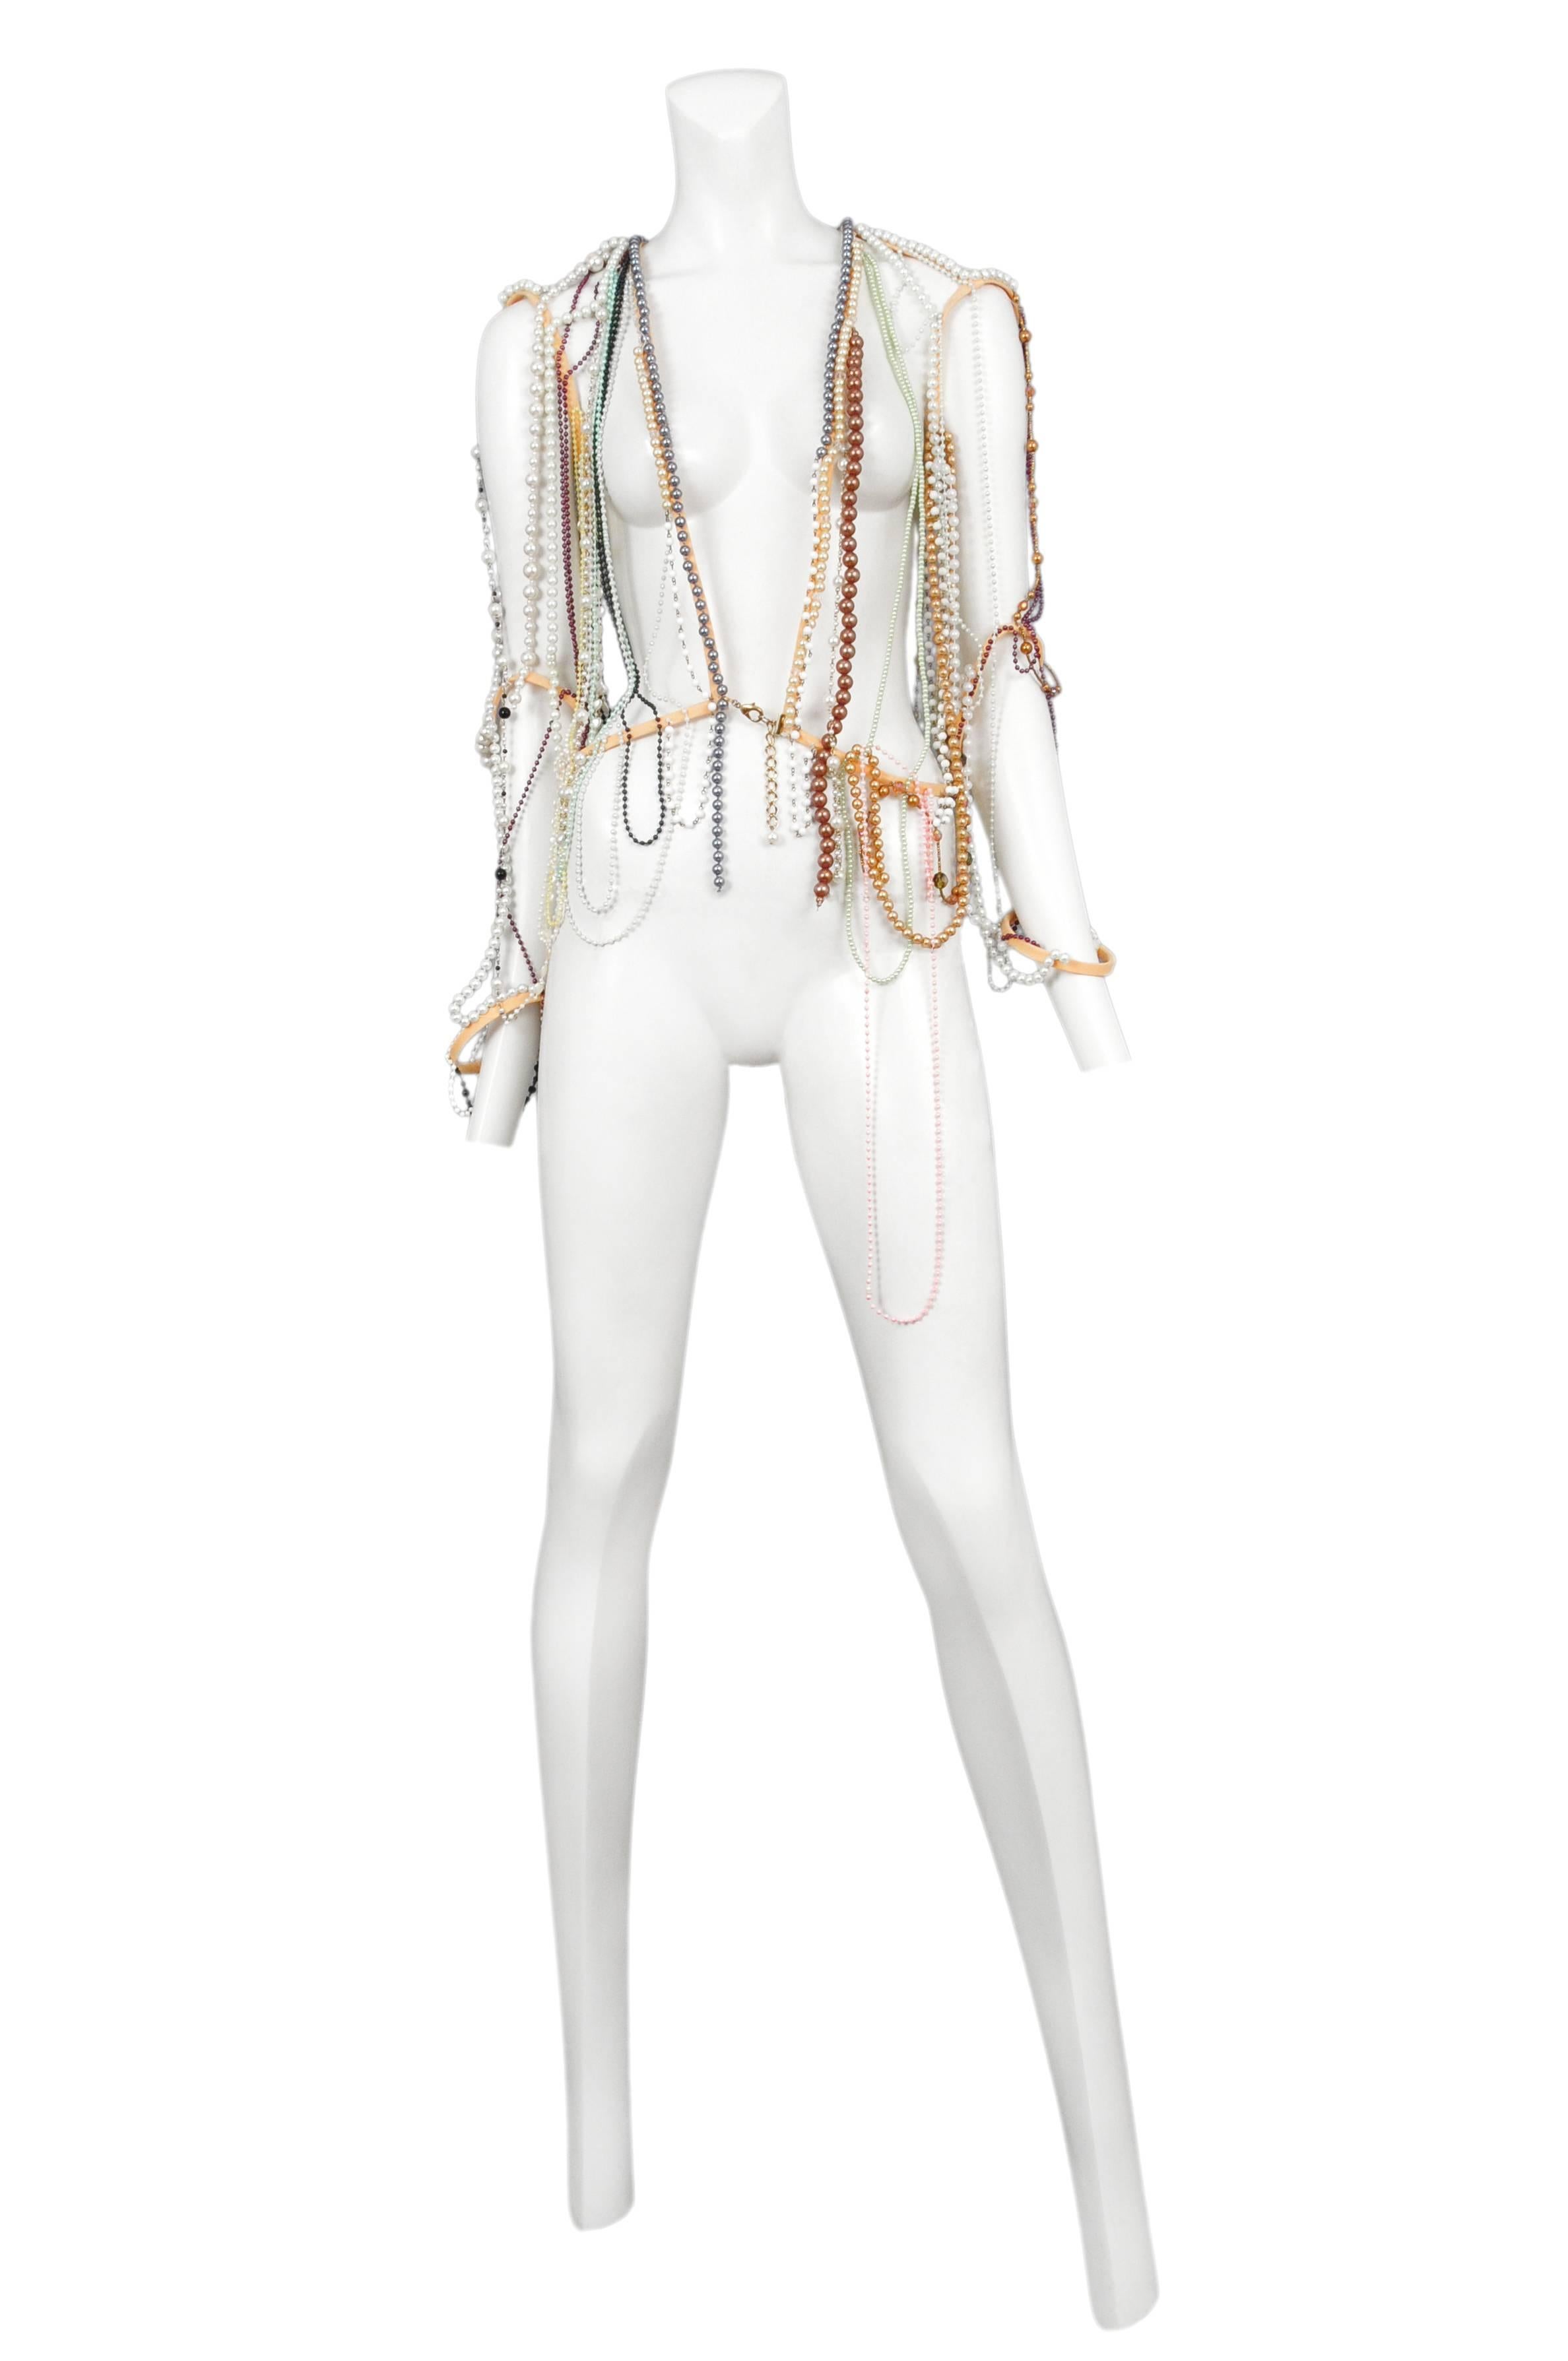 Vintage Maison Martin Margiela artisanal beaded jacket made from various vintage necklaces with hook and jump ring closure at front. 0 collection. Circa Summer 2006.
Please inquire for additional images.